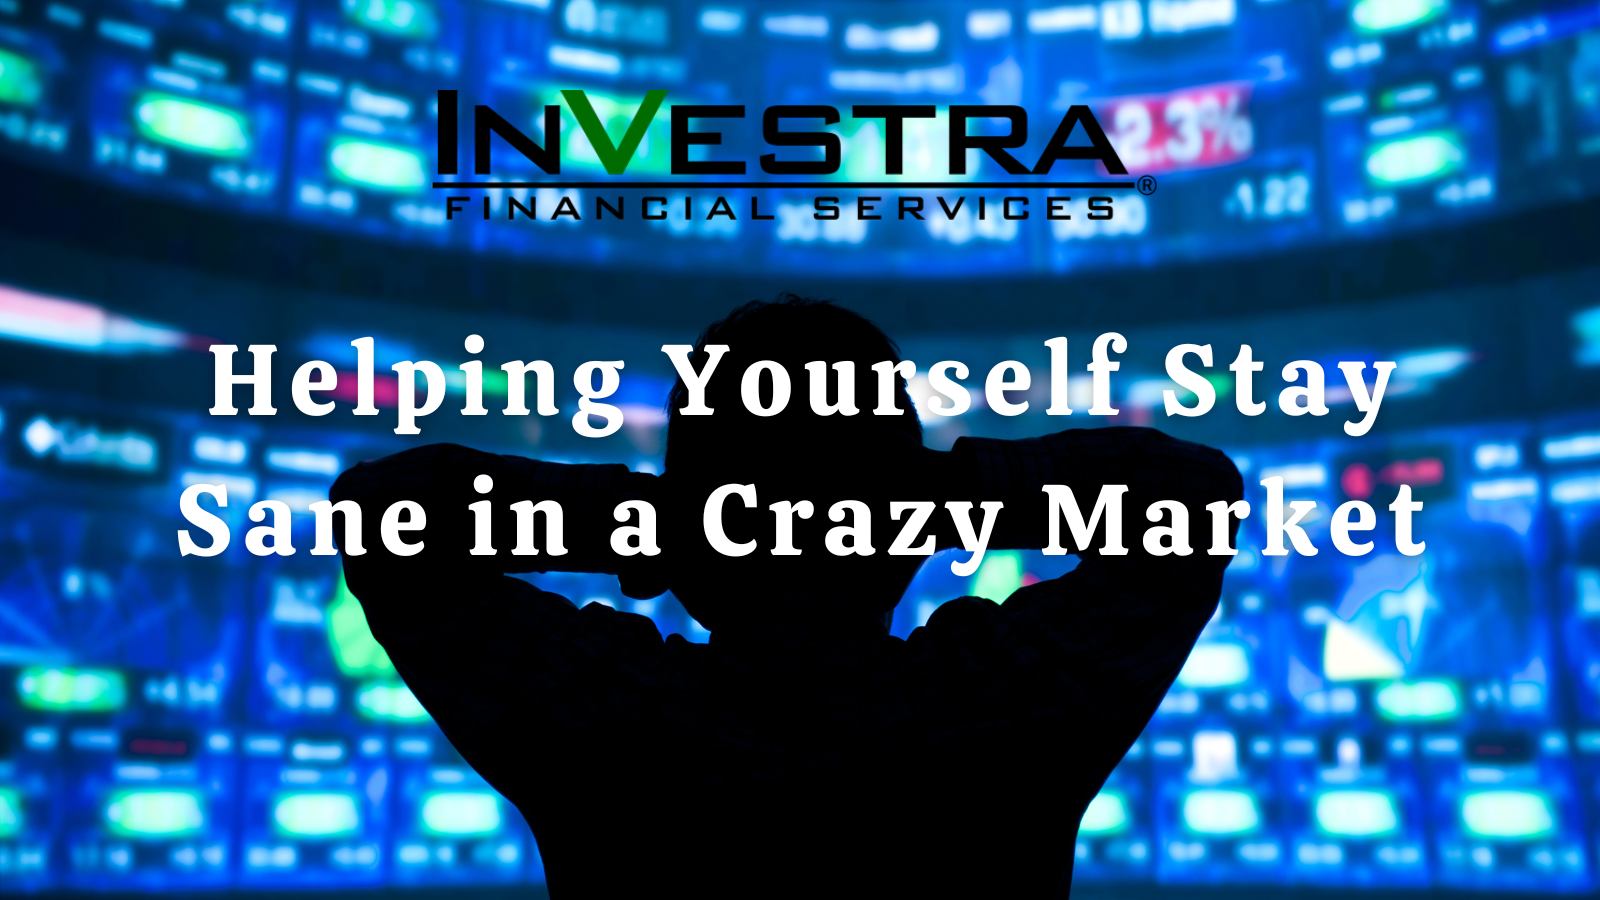 11 Ways To Help Yourself Stay Sane In a Volatile Market